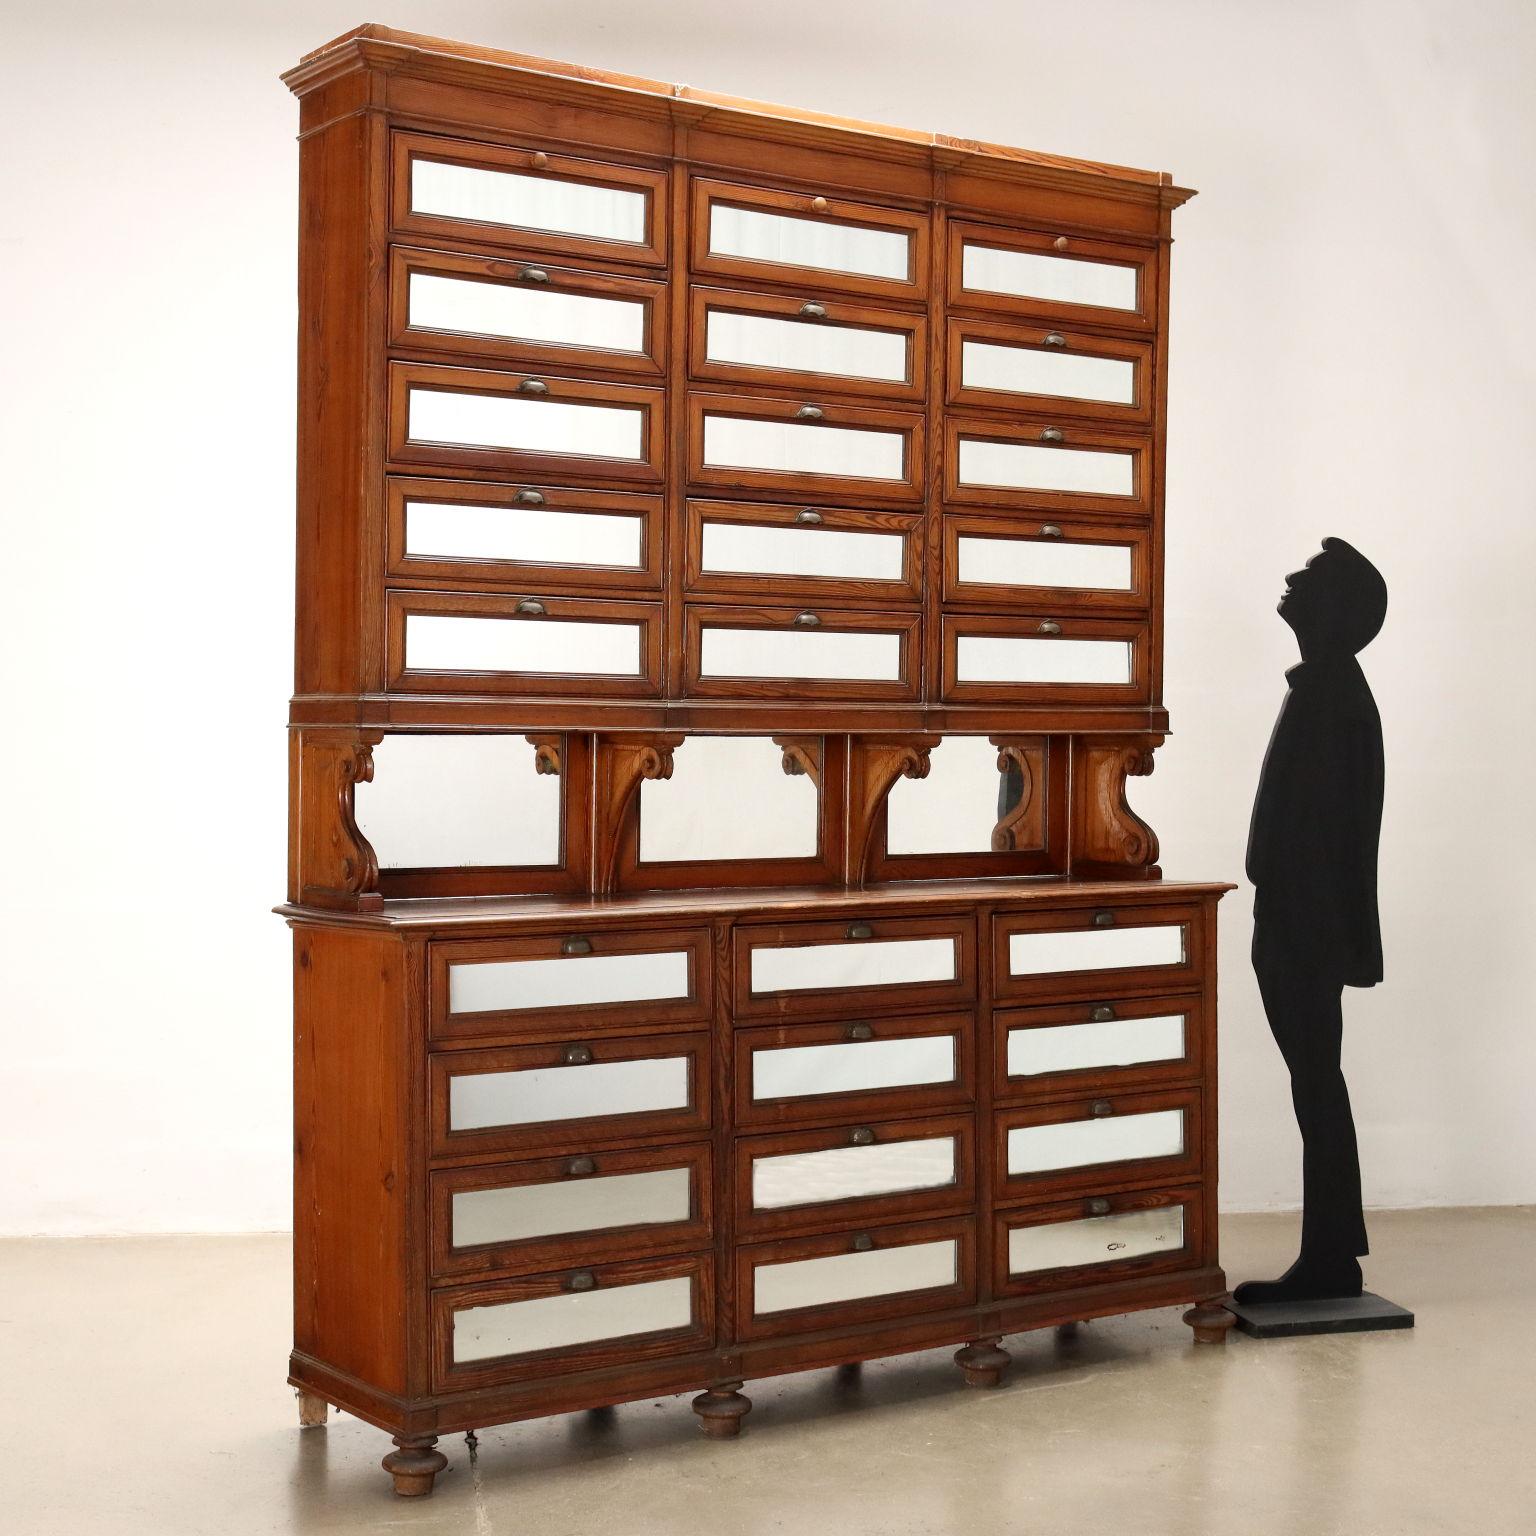 Large store cabinet made of larch wood, consisting of four rows each with three drawers in the lower body, while in the riser there are five rows. Made of larch wood, the front of each drawer as well as the panels at the bottom of the compartment